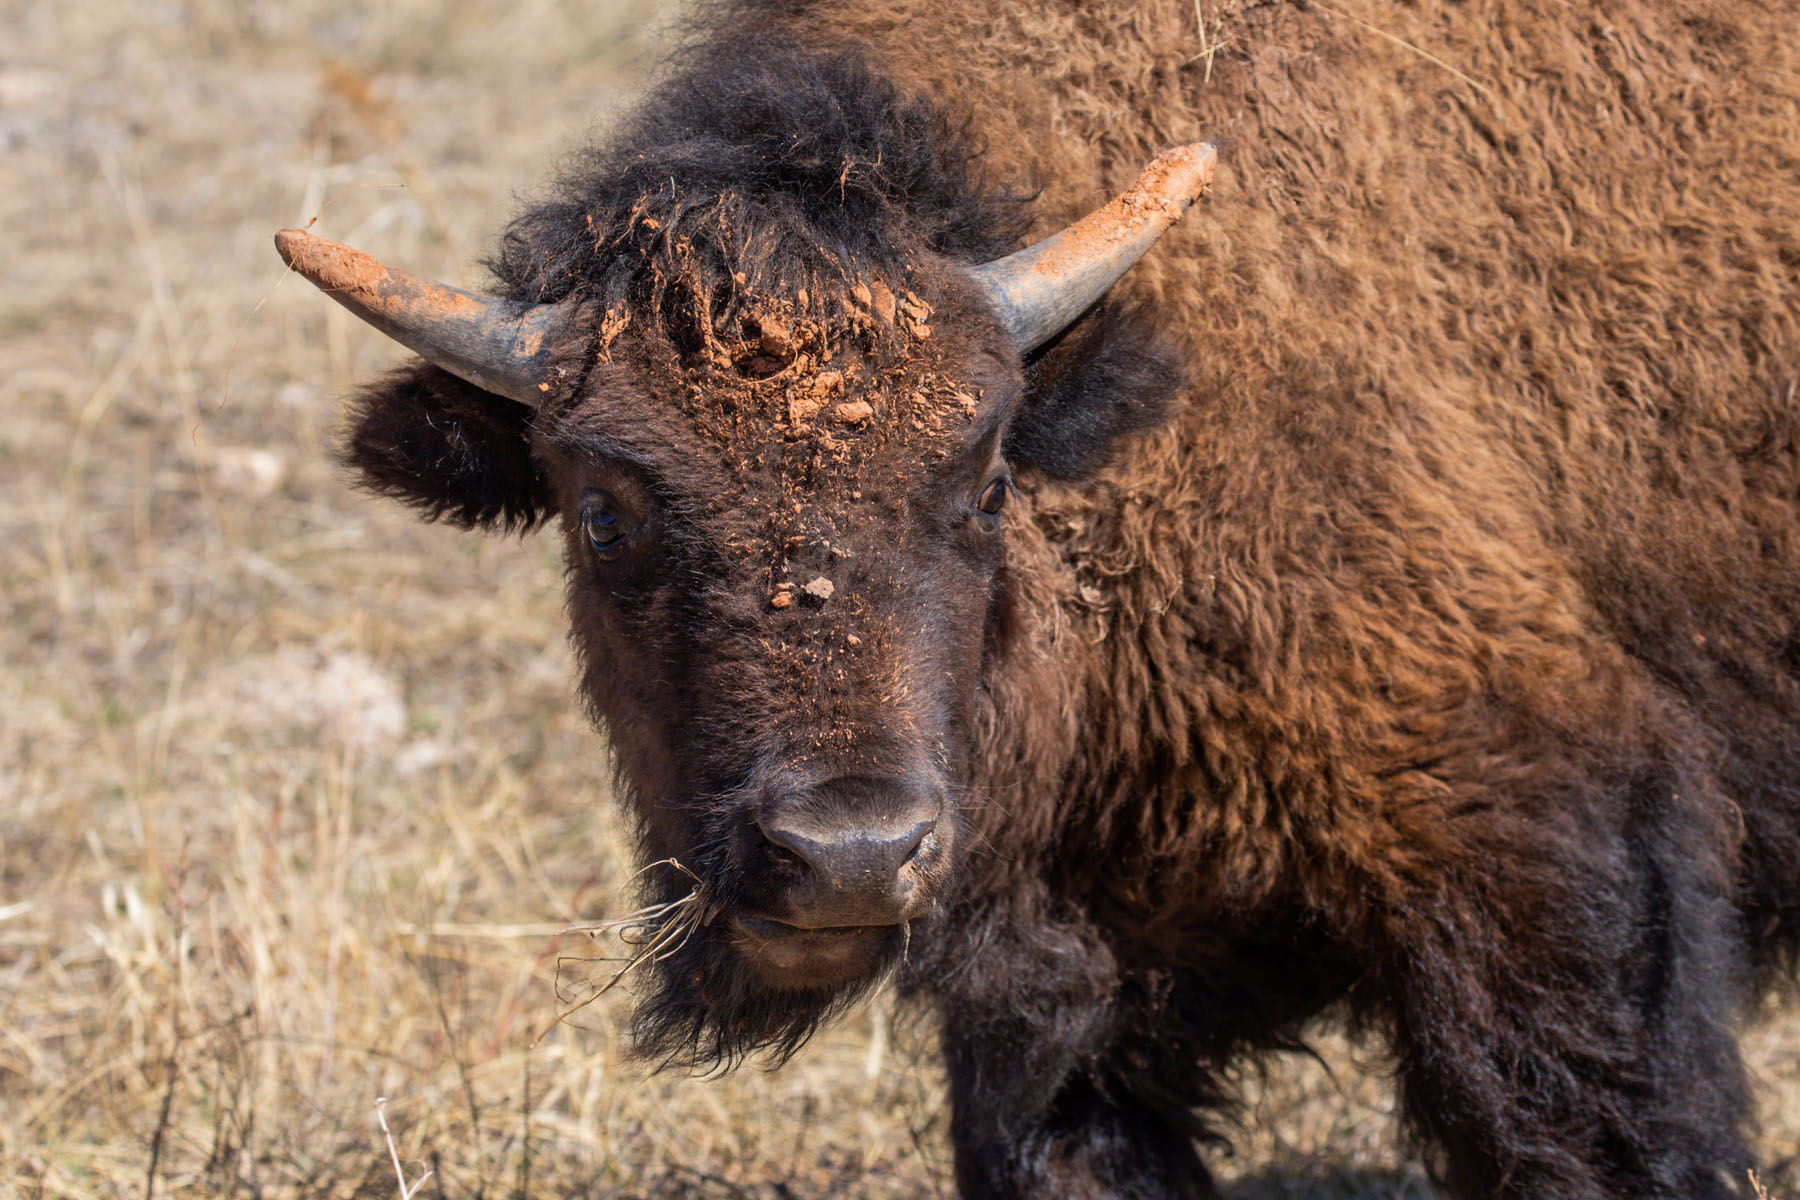 On the trip down to Texas, young bison with a muddy face, Custer State Park, SD.  Click for next photo.